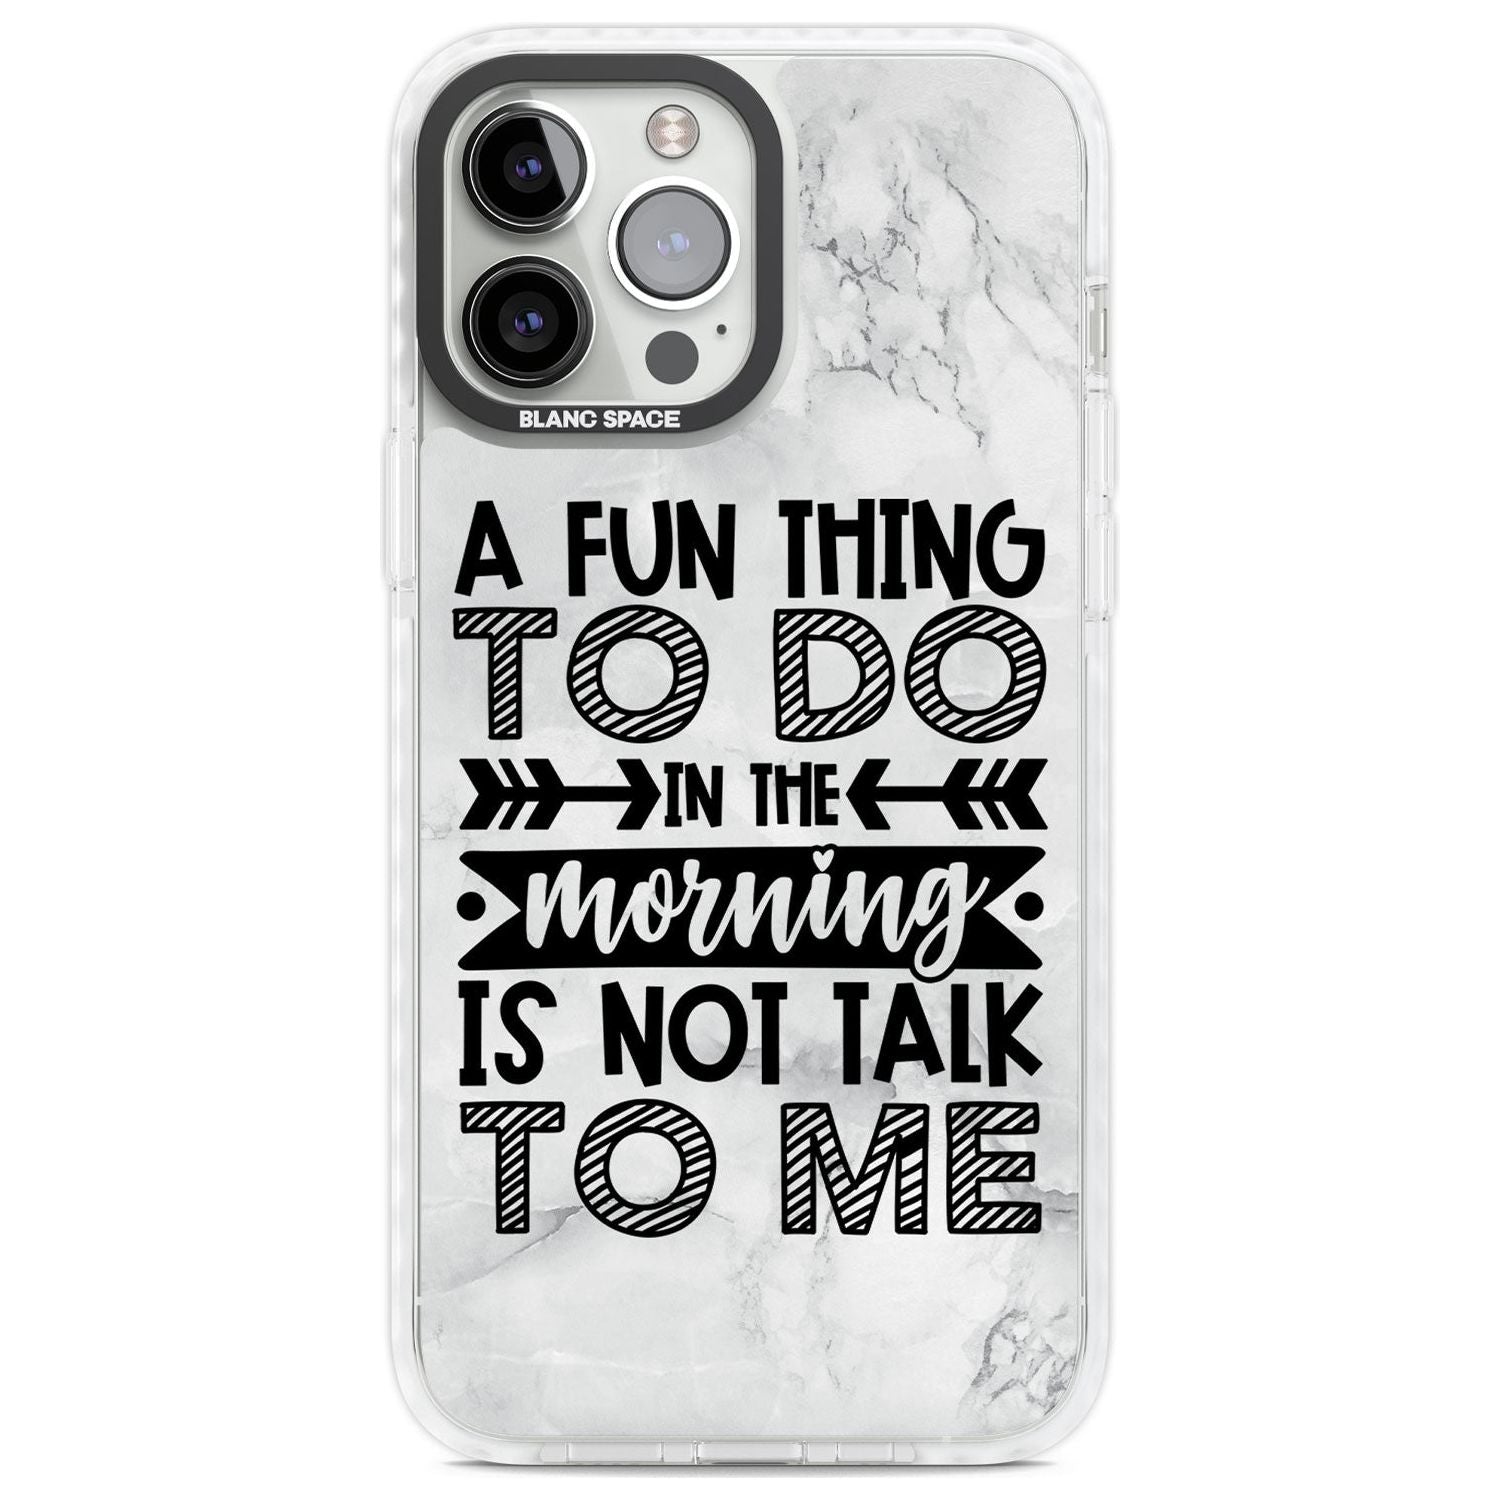 A Fun thing to do Phone Case iPhone 13 Pro Max / Impact Case,iPhone 14 Pro Max / Impact Case Blanc Space